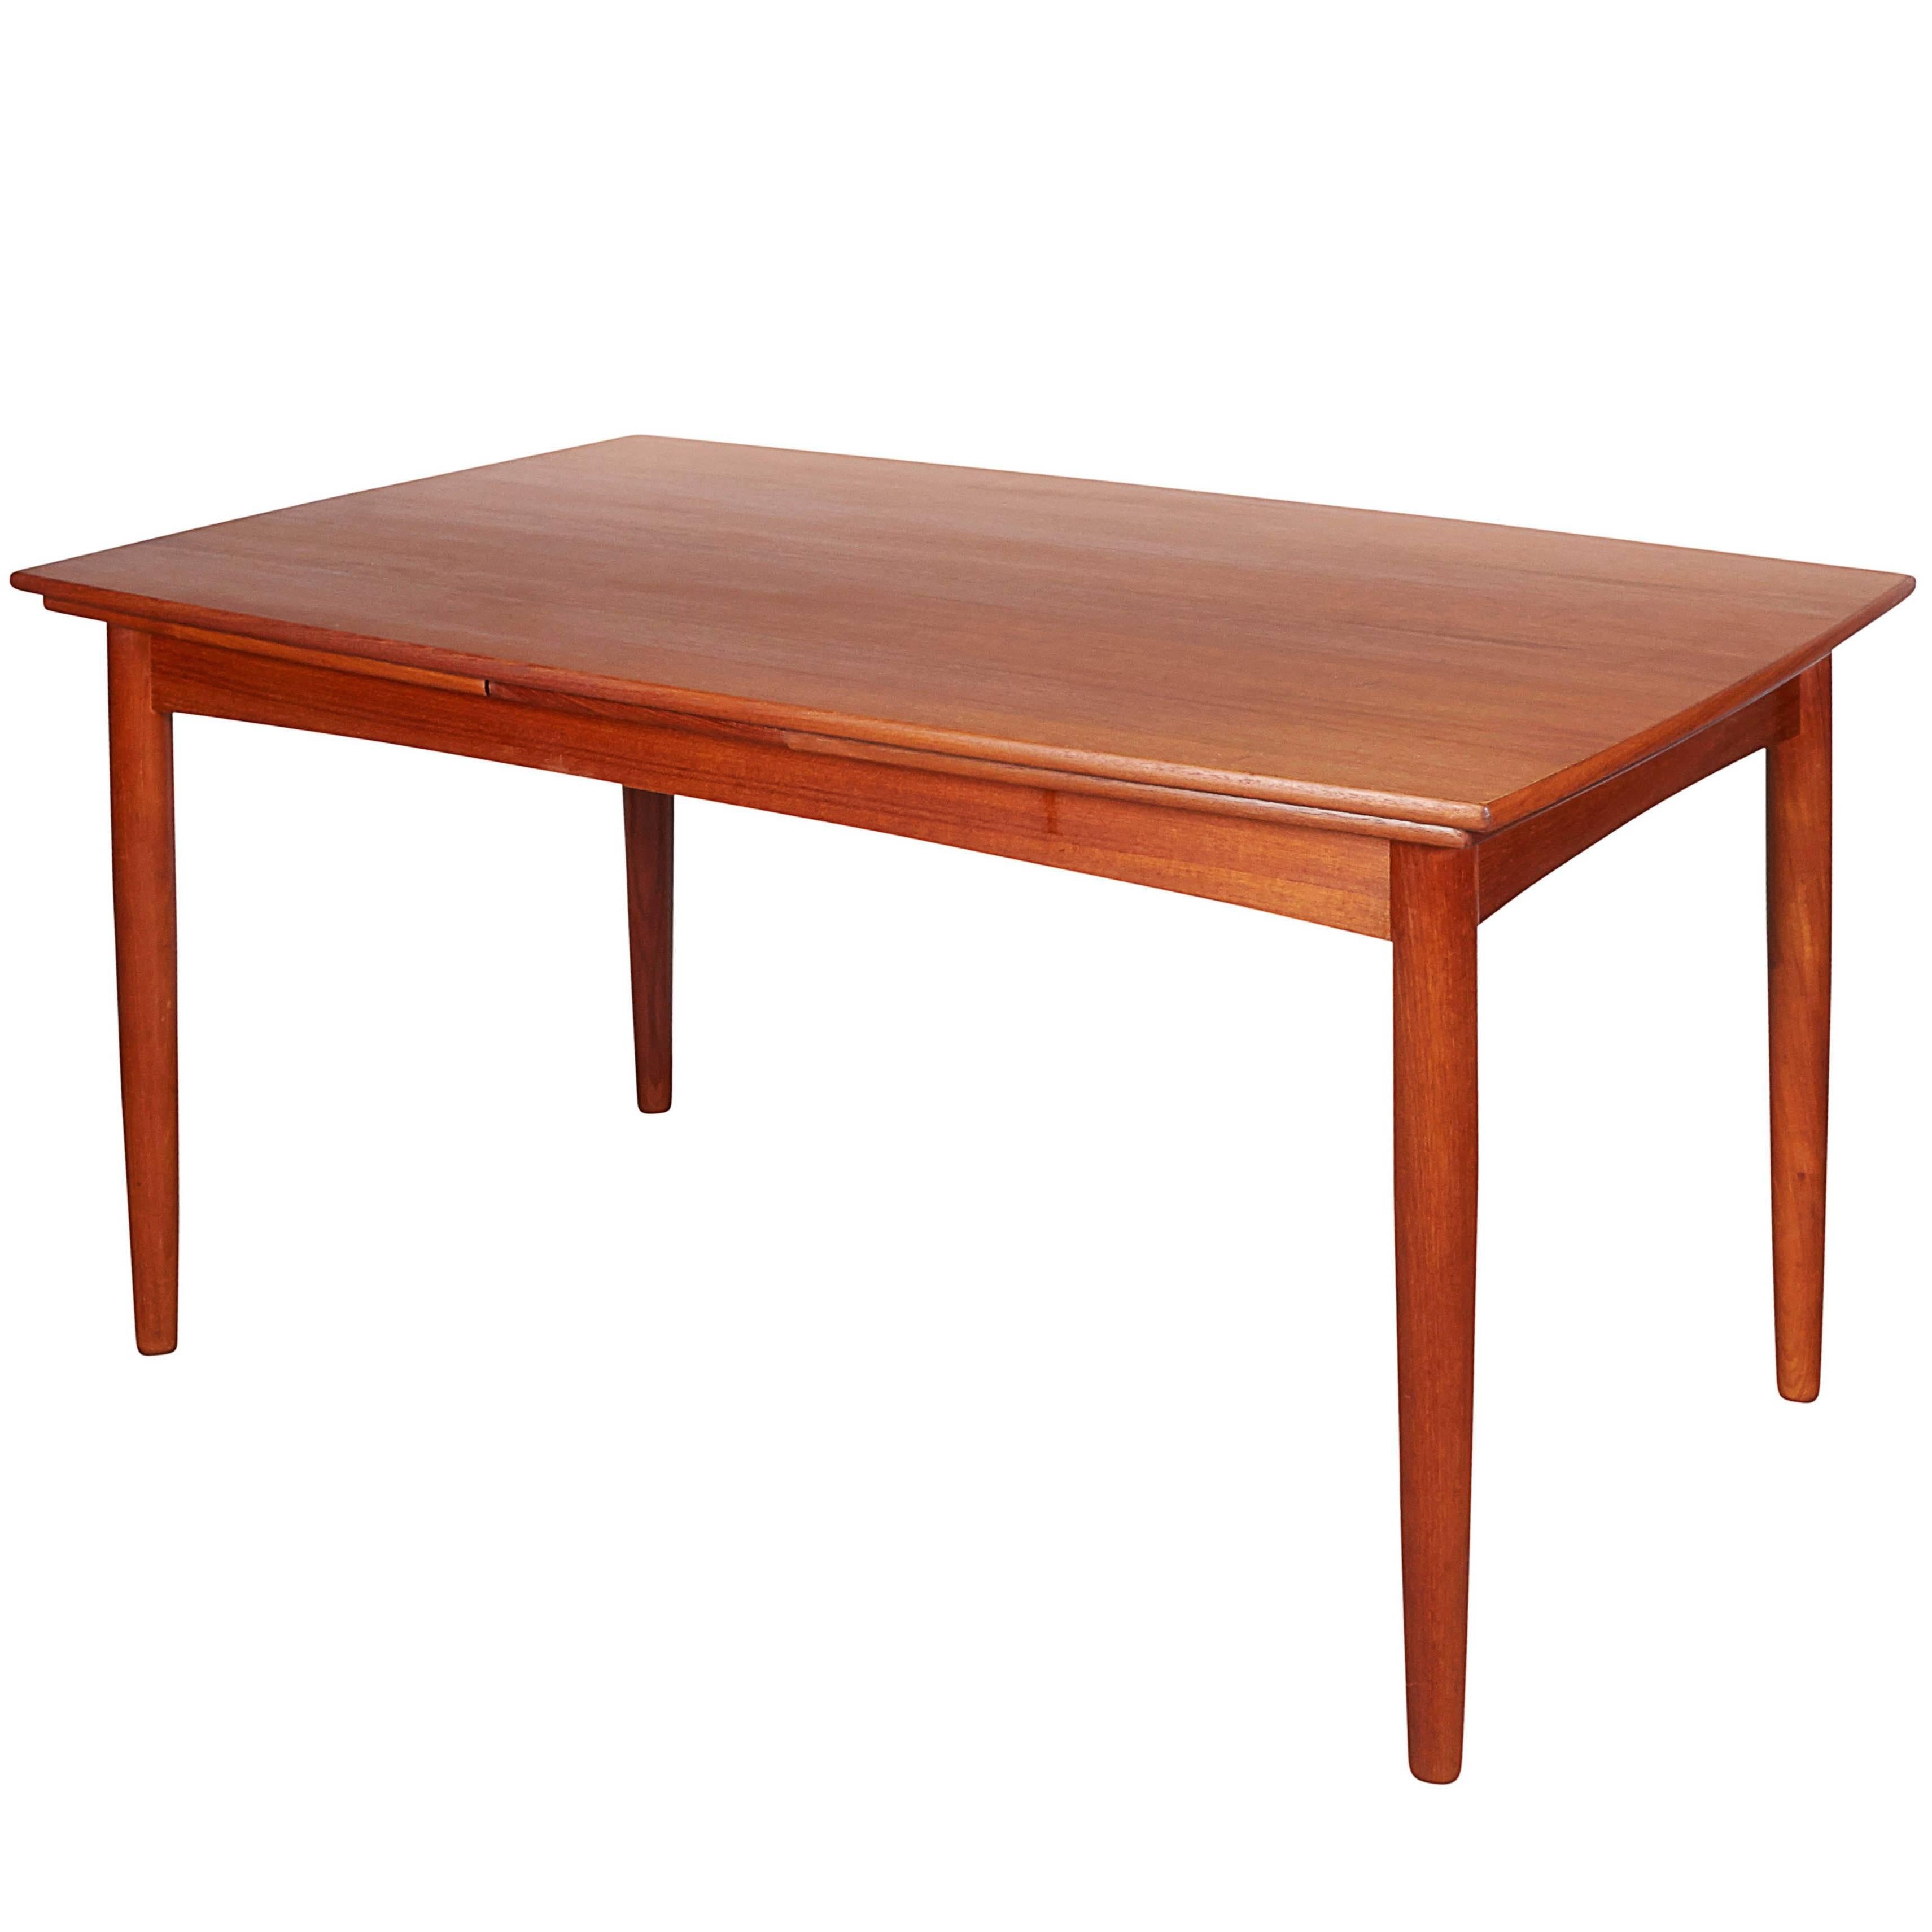 Danish Modern Dining Table, Expandable